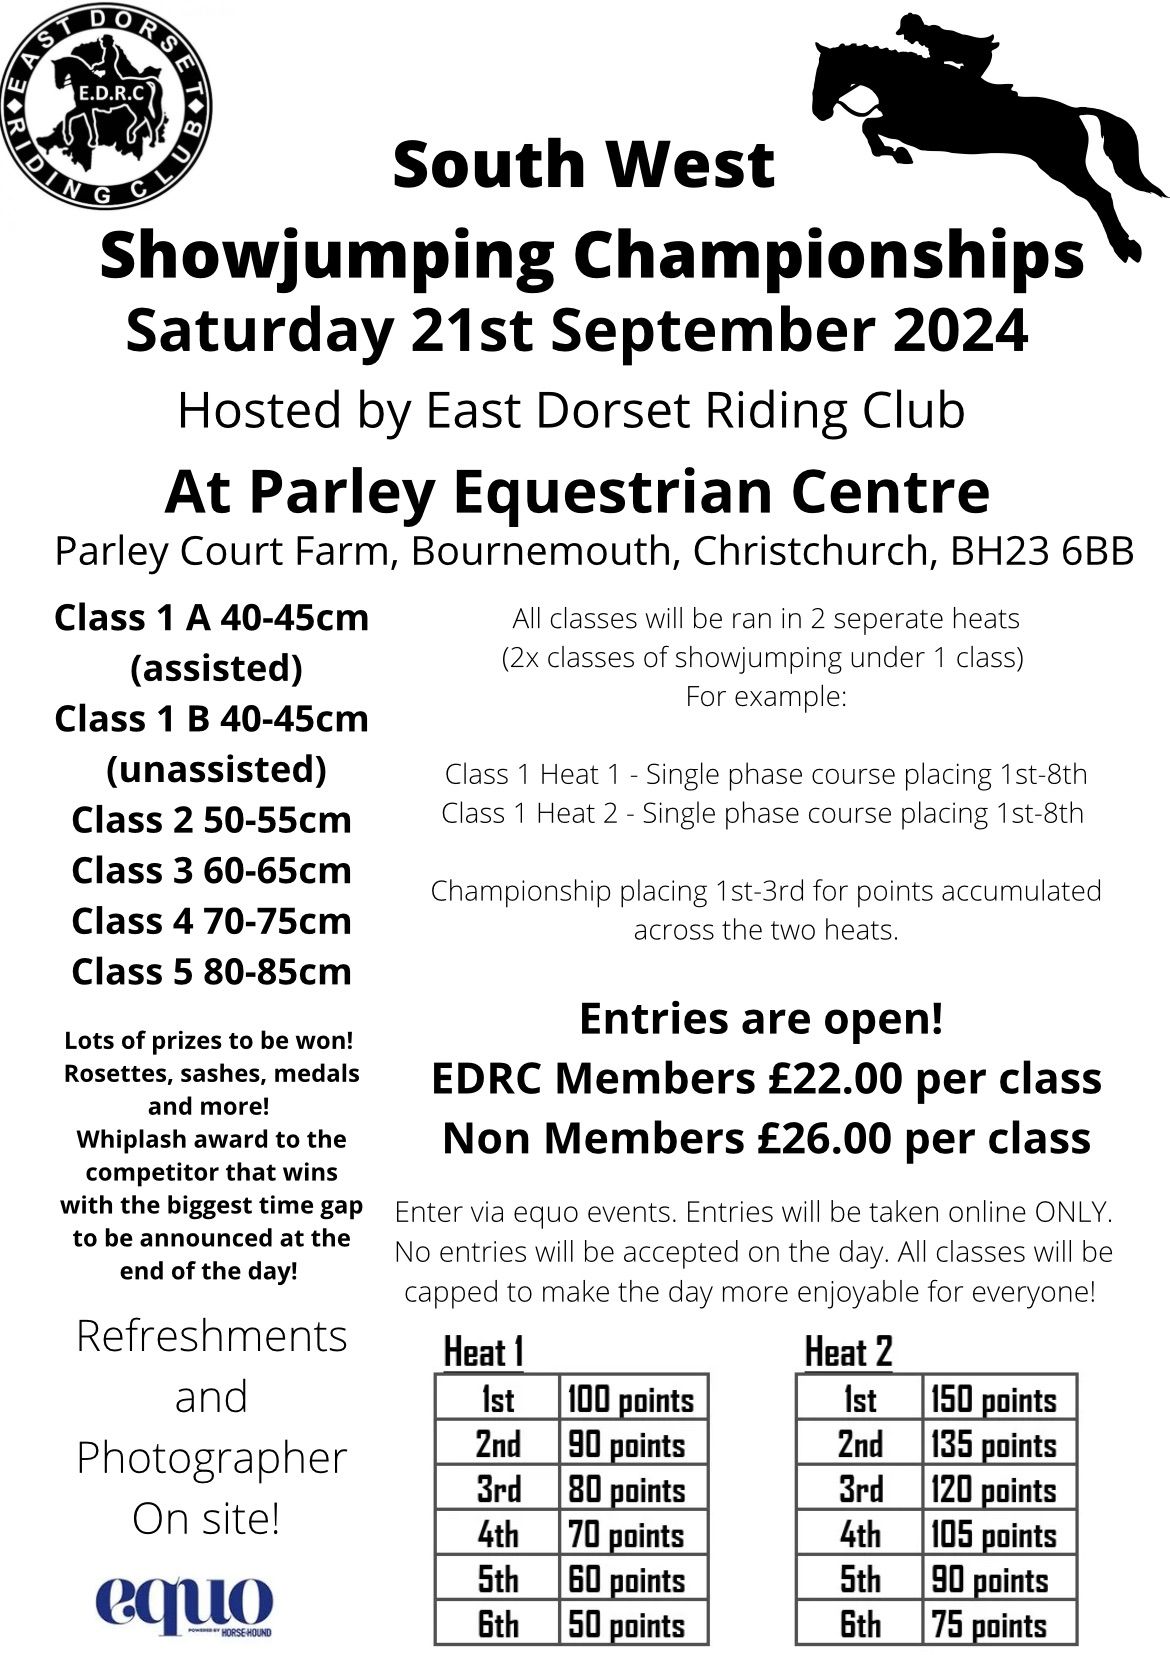 South West Showjumping Championships 